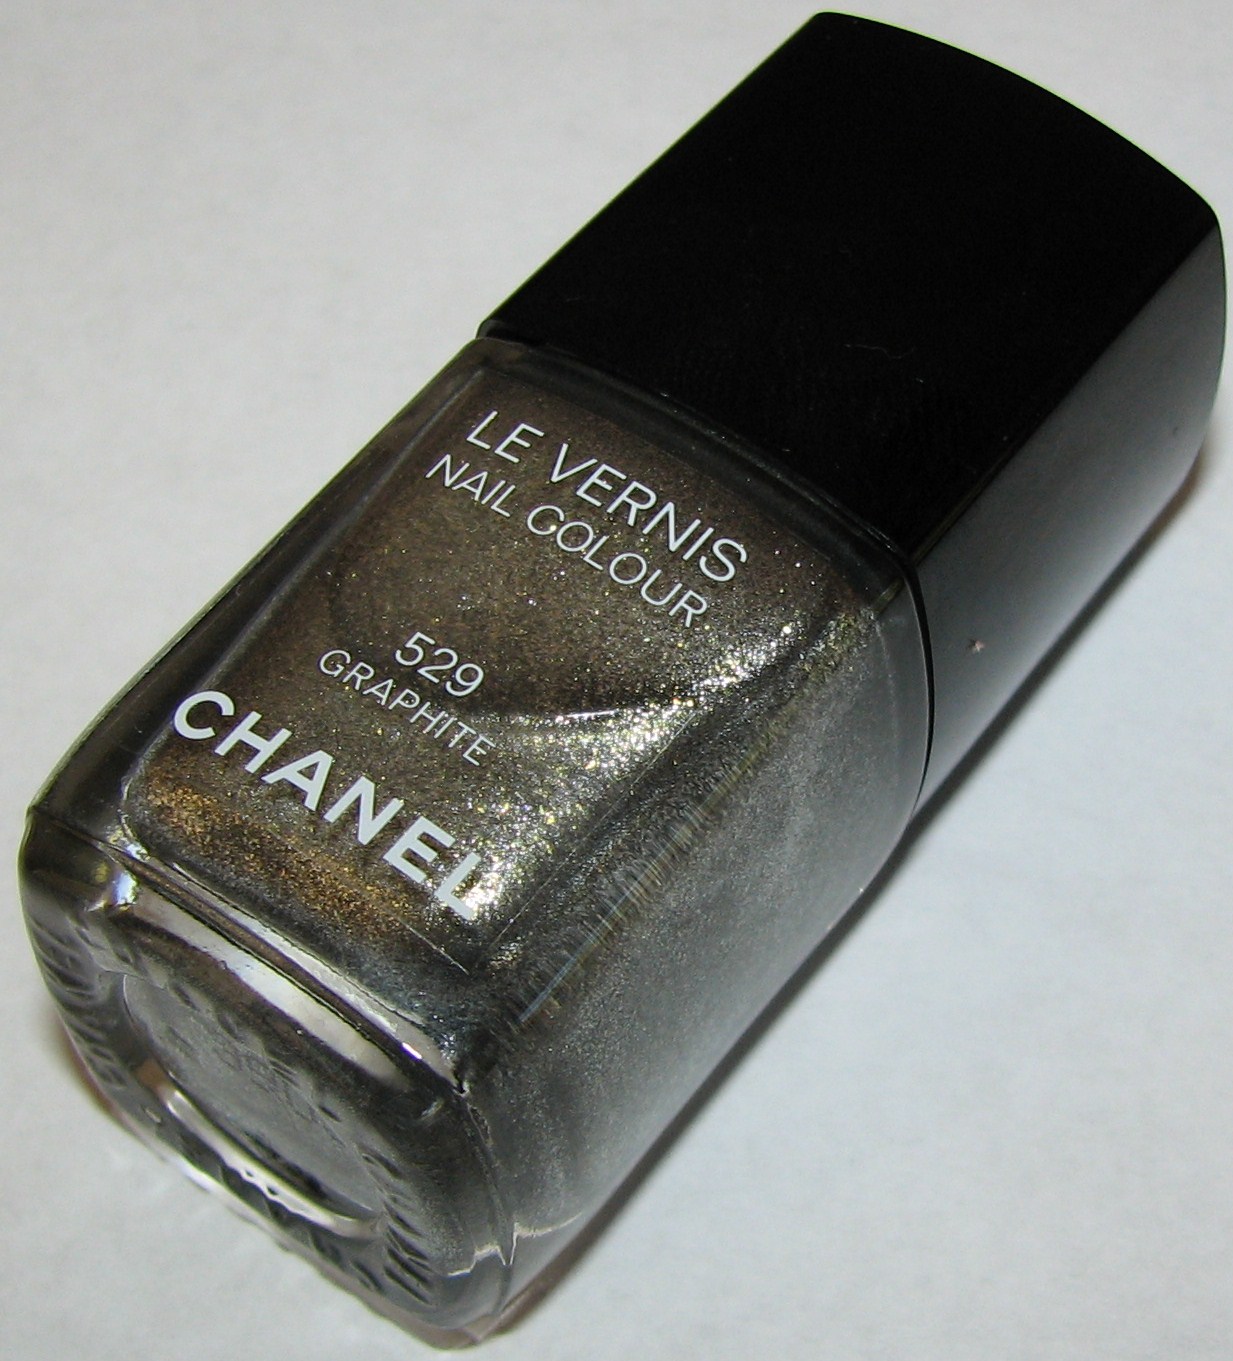 Chanel's new It nail shade :: Graphite AW11